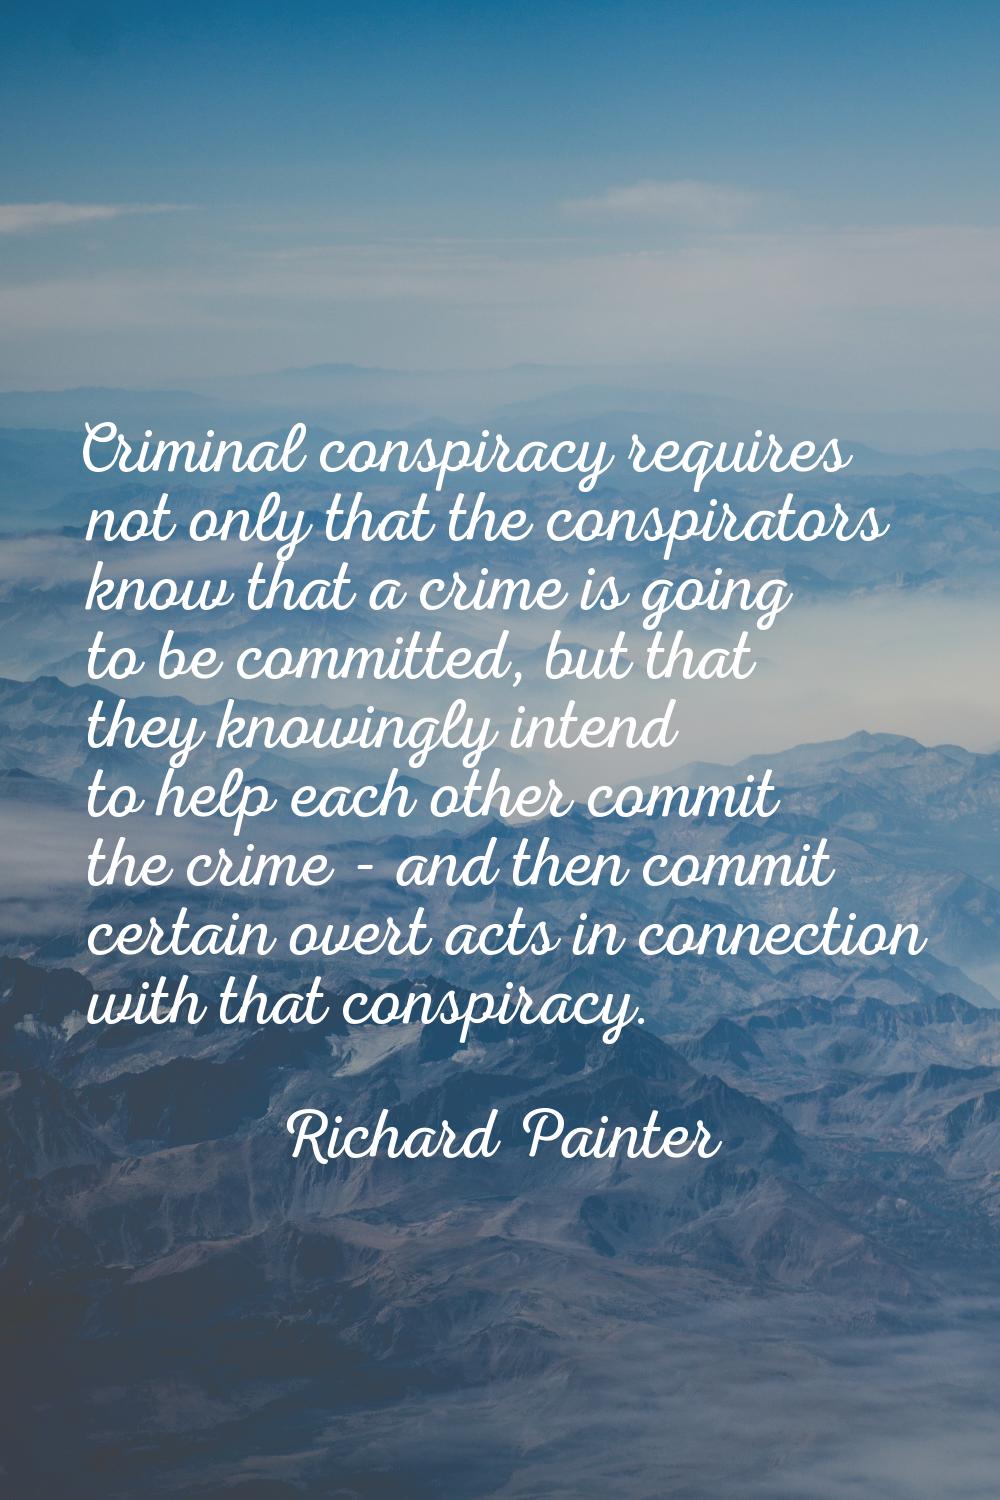 Criminal conspiracy requires not only that the conspirators know that a crime is going to be commit